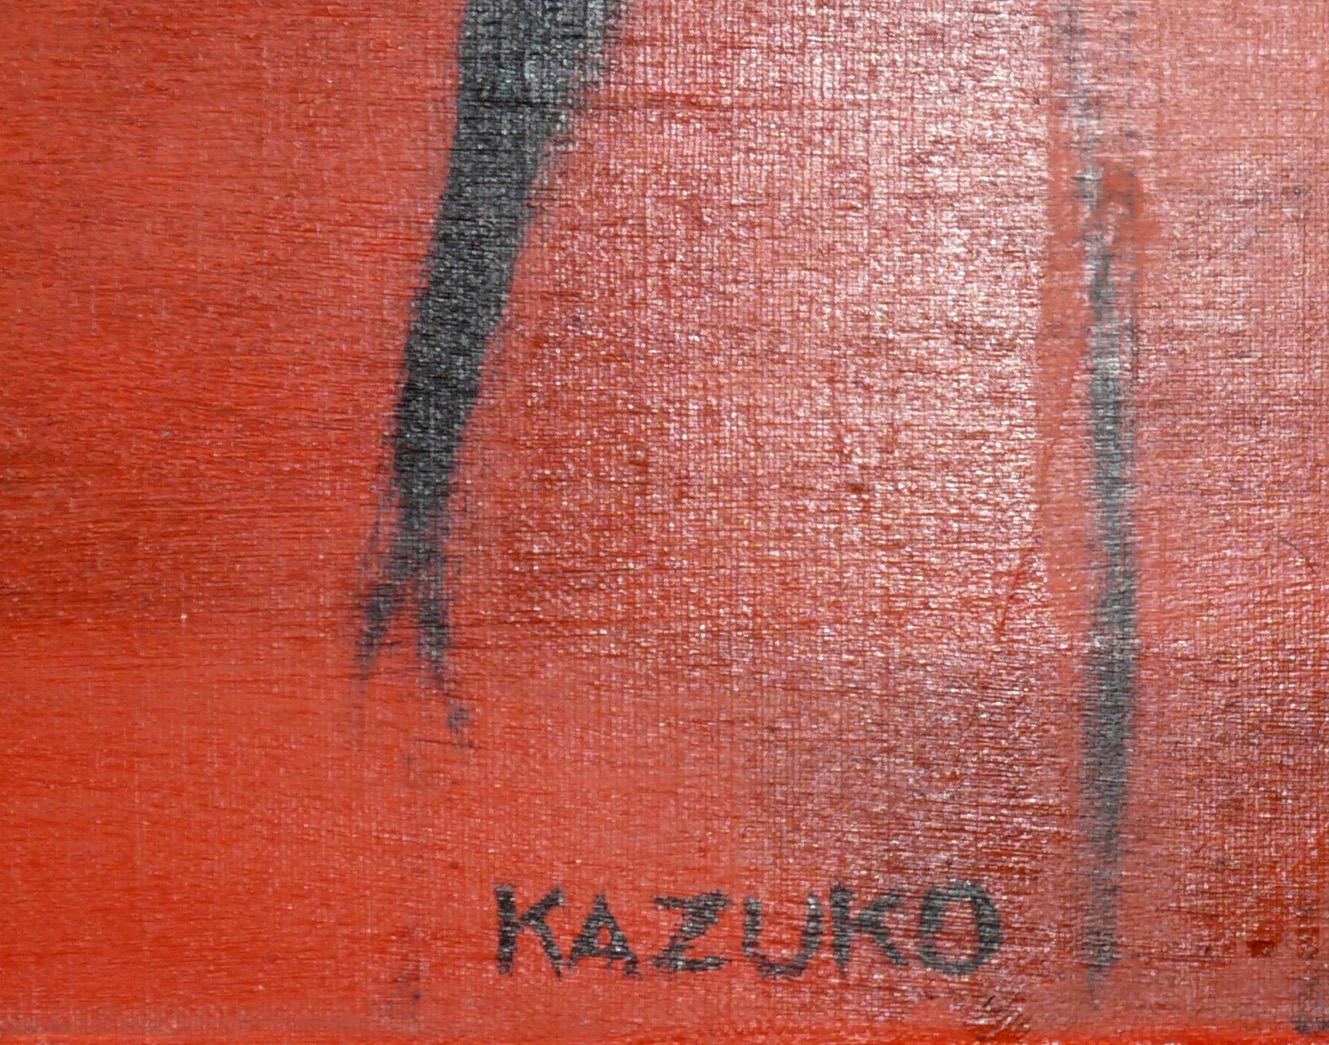 Kazuko Inoue Early Abstract Modernist Painting circa 1960s Large Scale 51